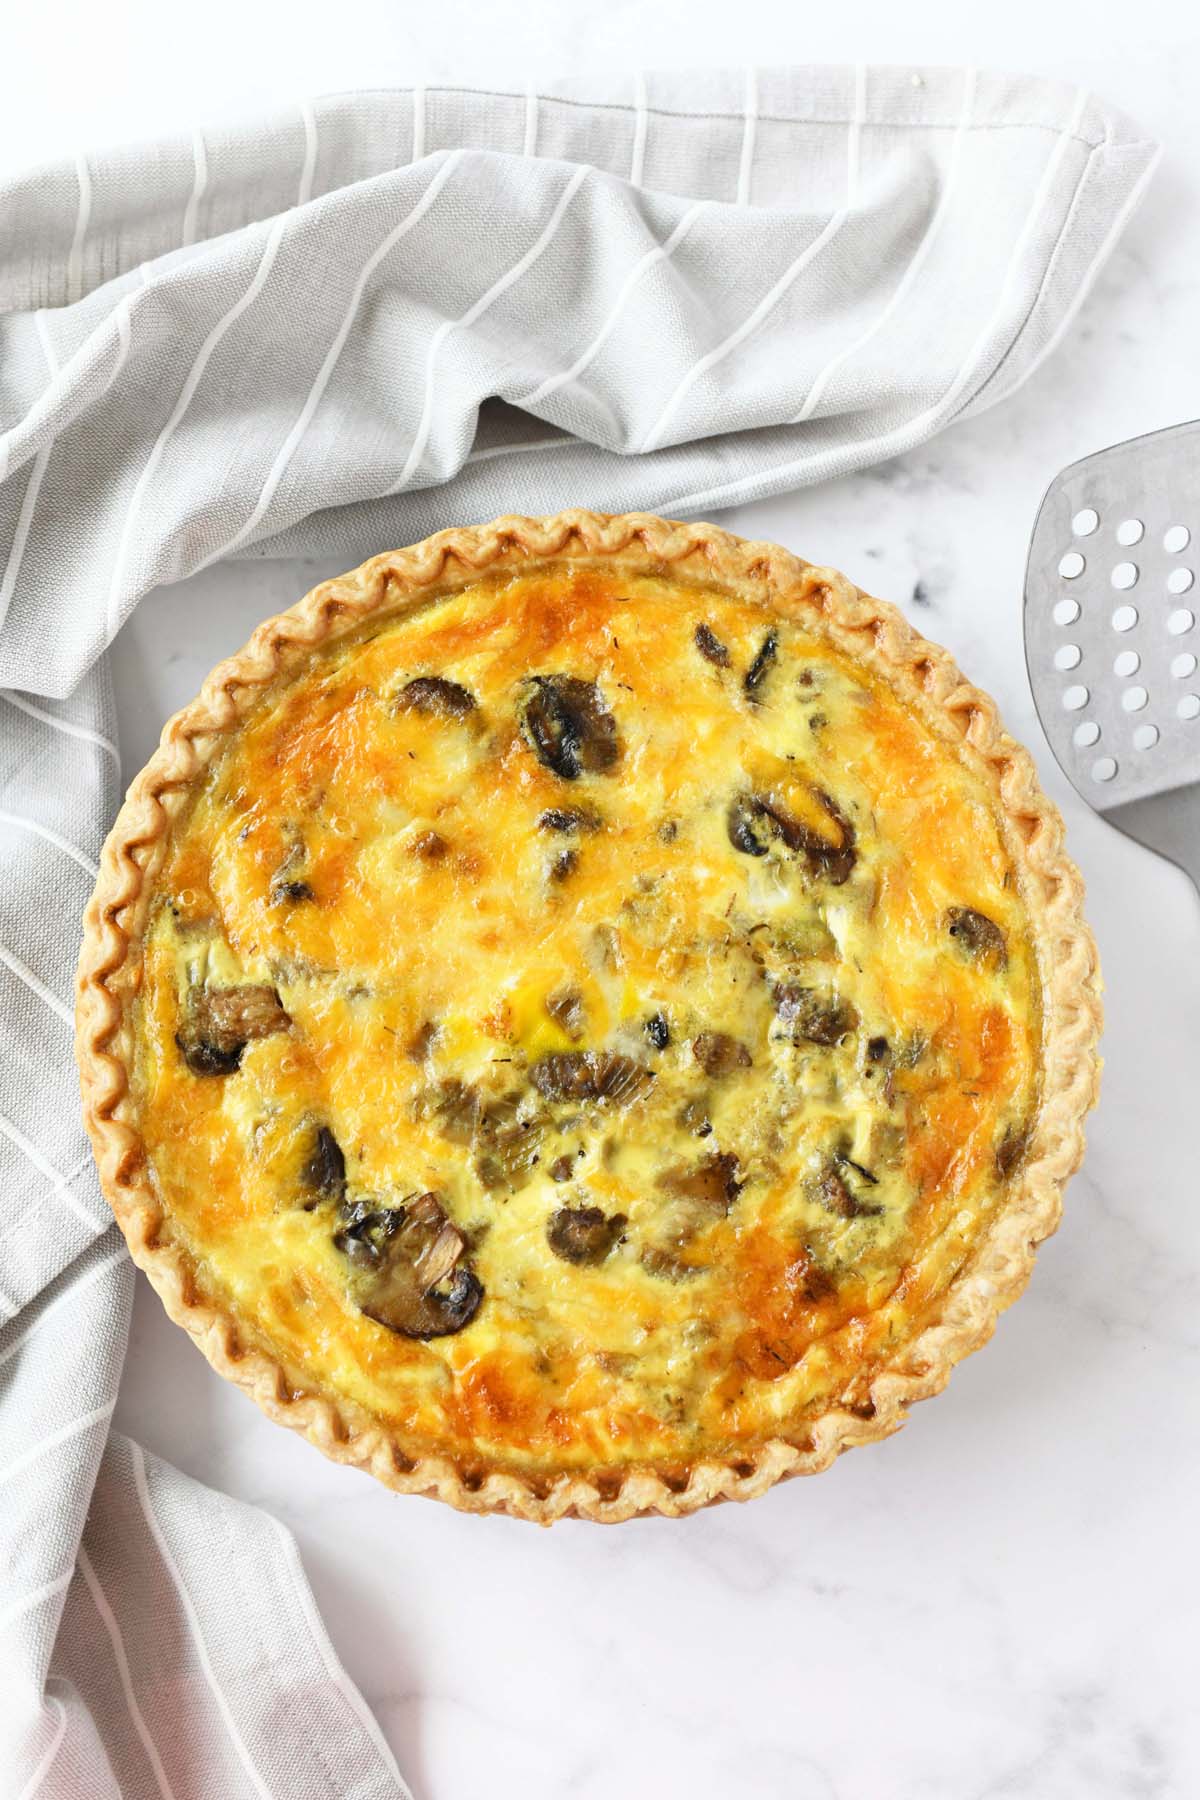 A baked caramelized onion and mushroom quiche on a white table.